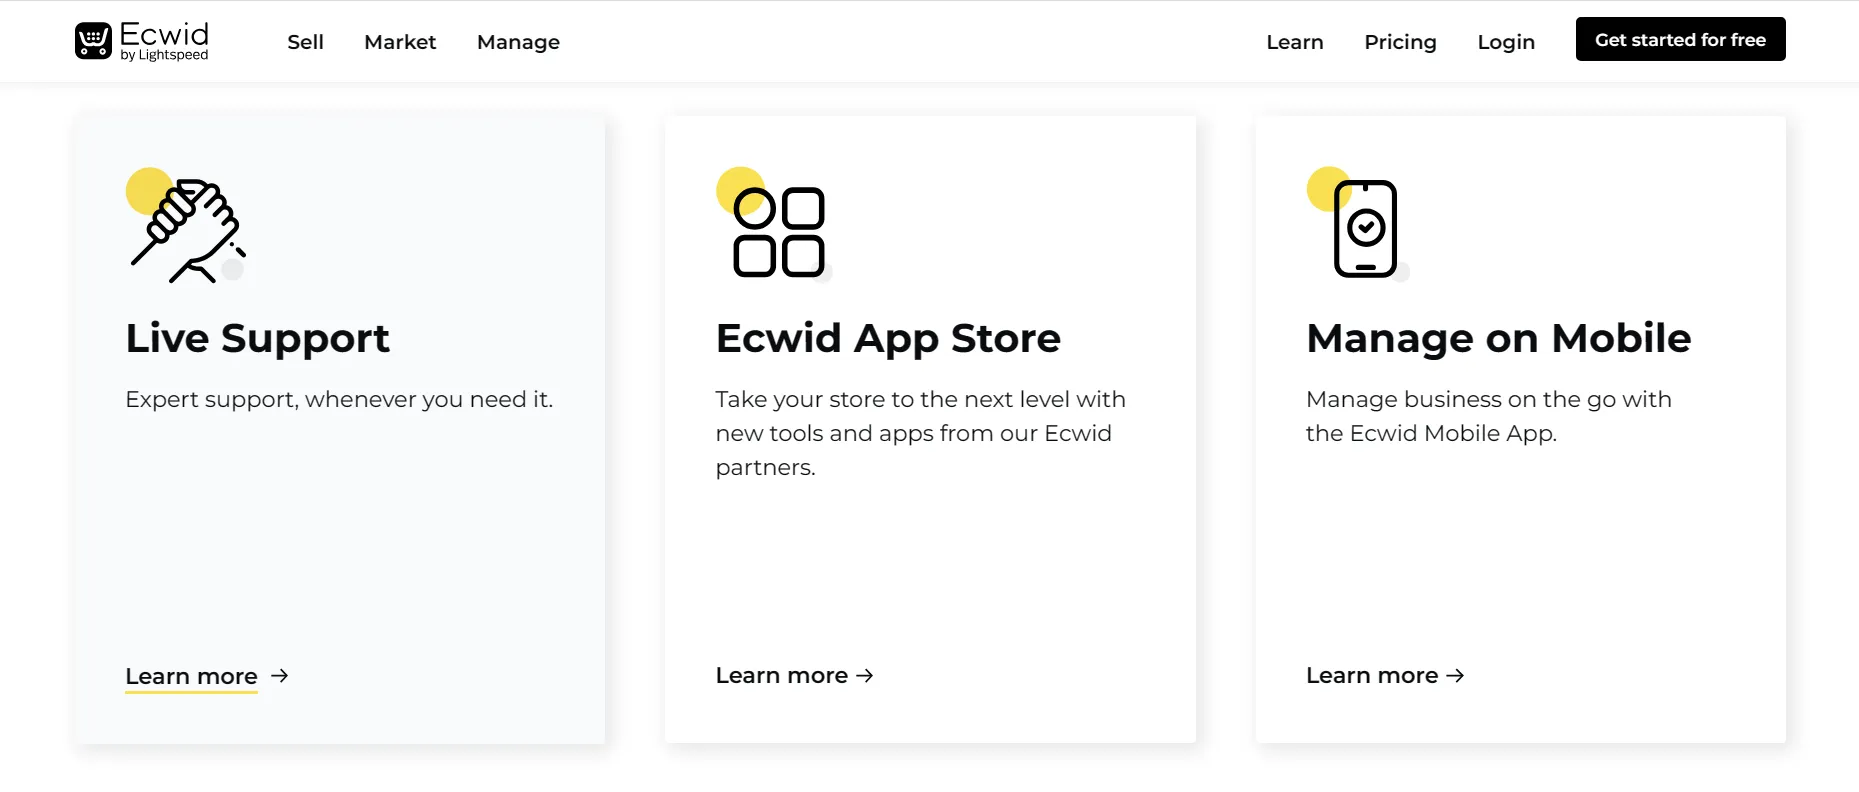 Ecwid Review- Features